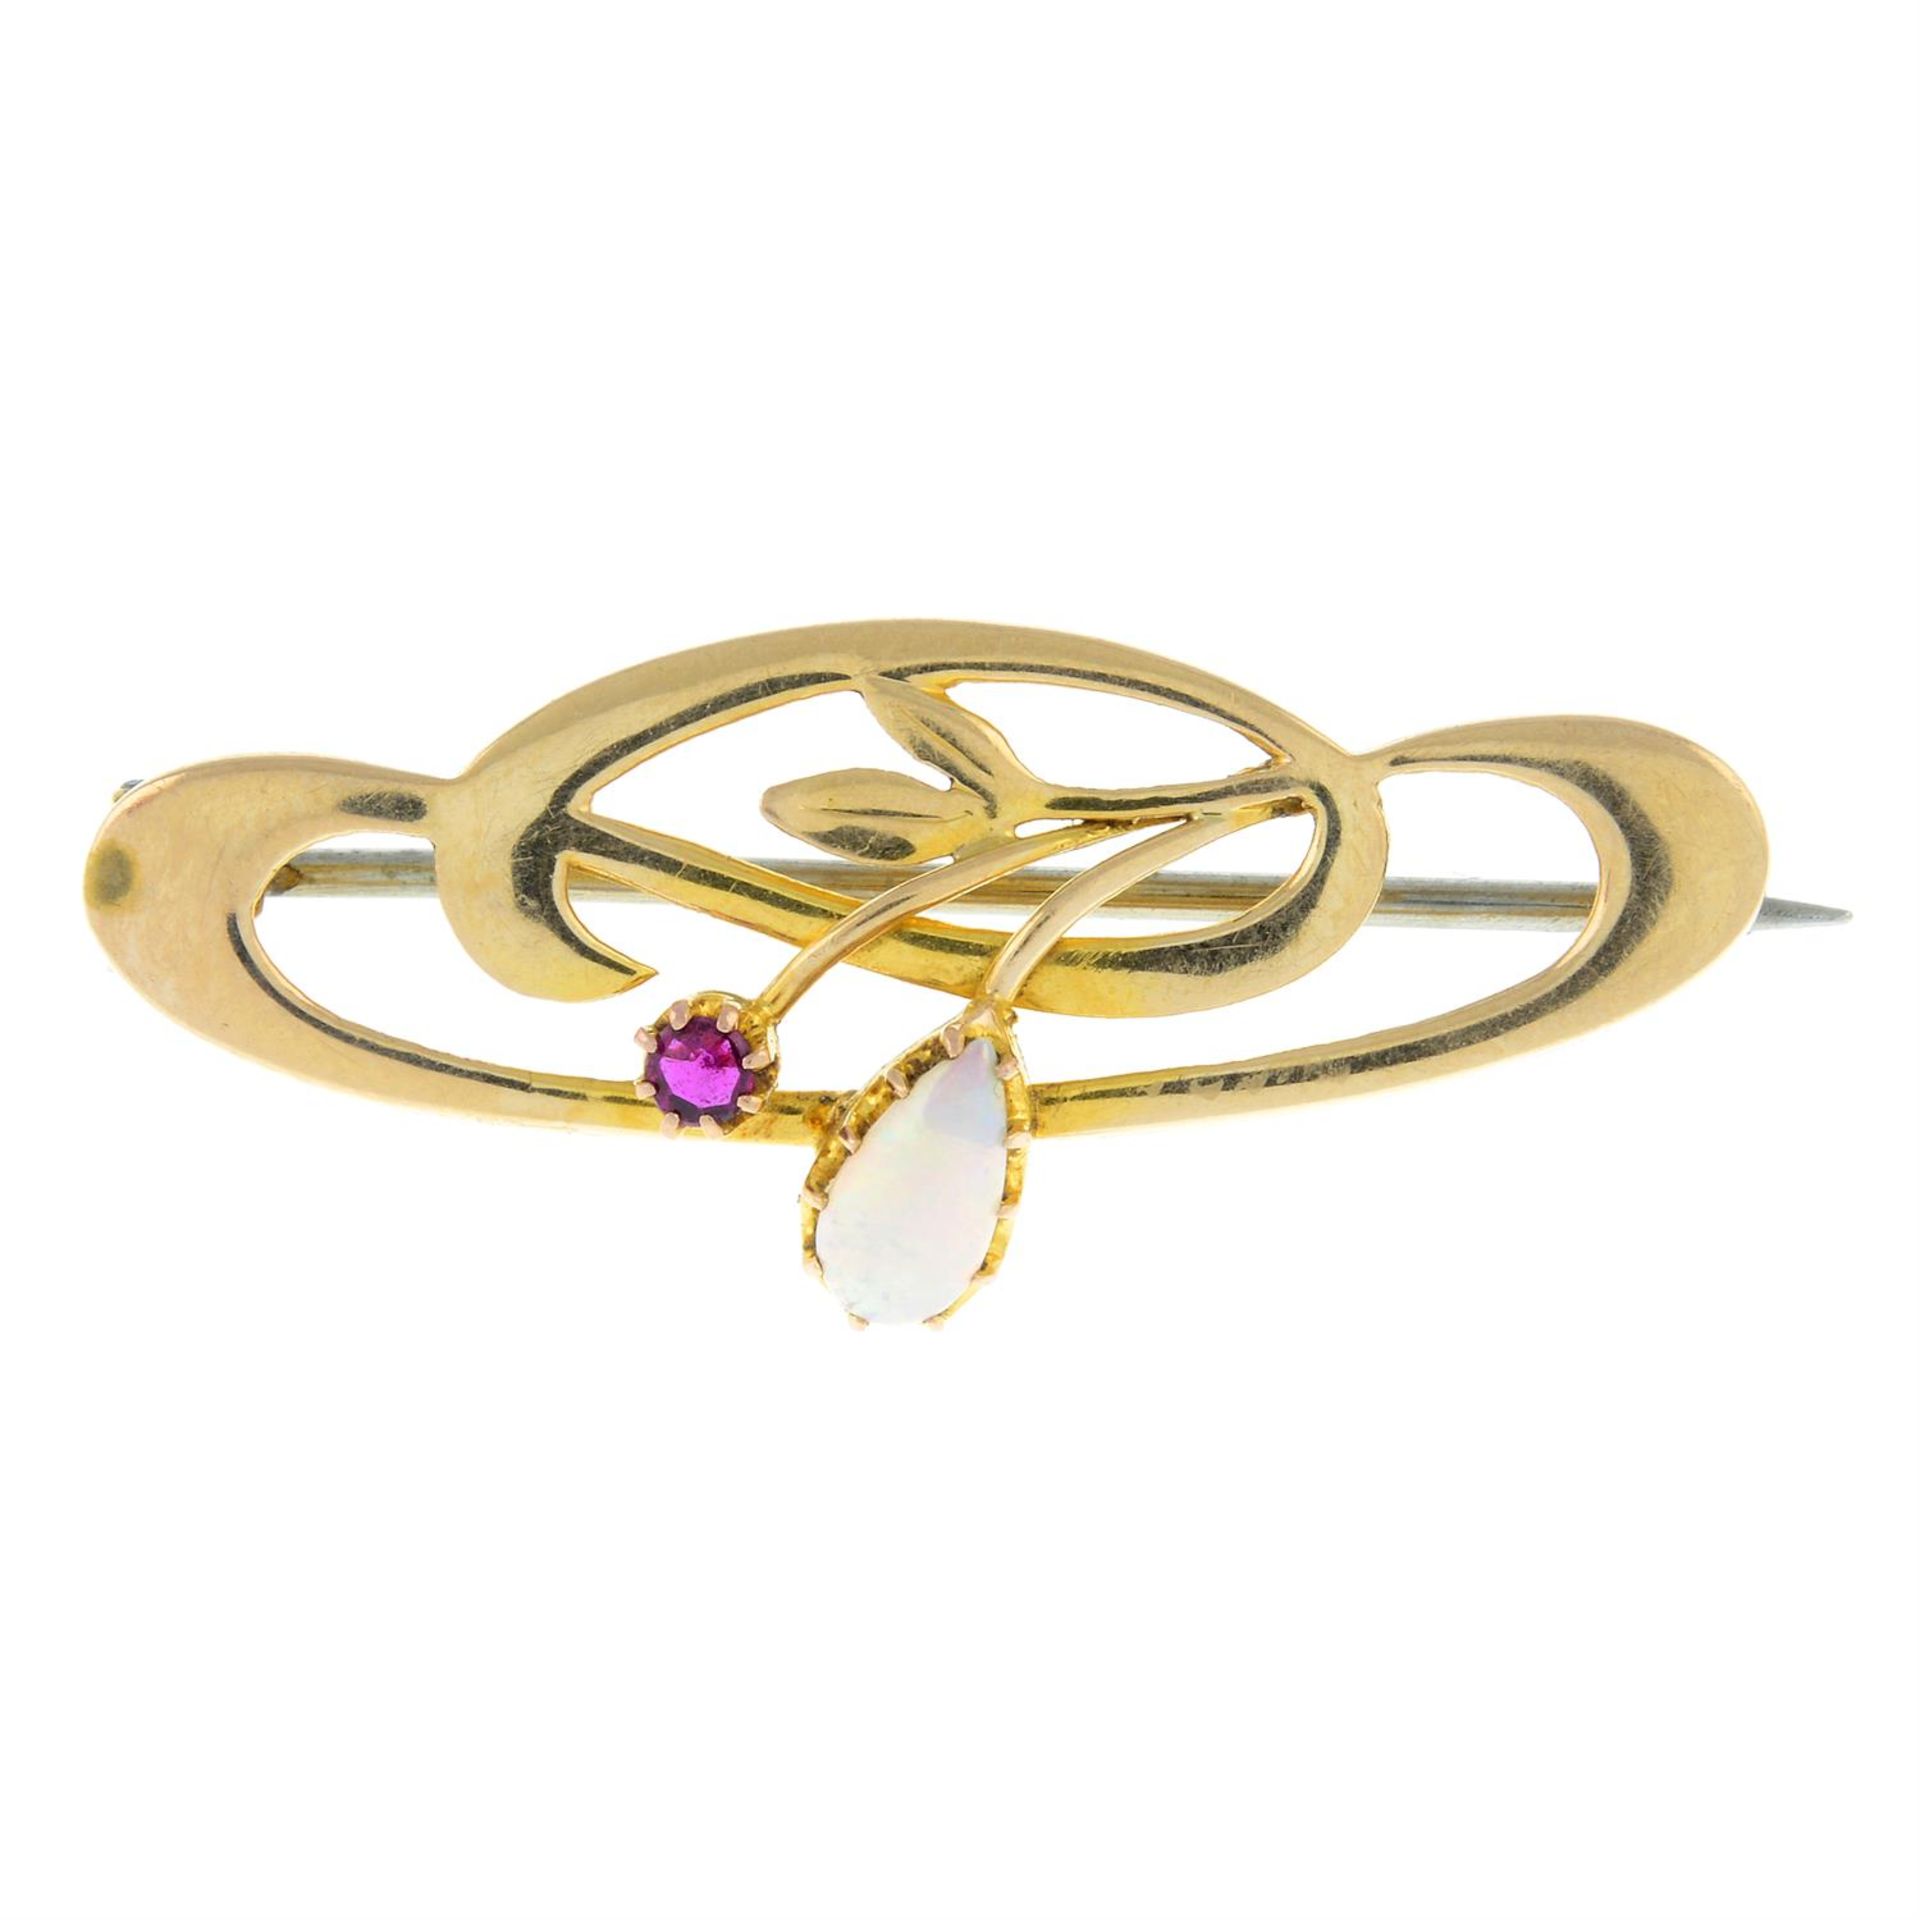 An Art Nouveau 15ct gold ruby and opal brooch.